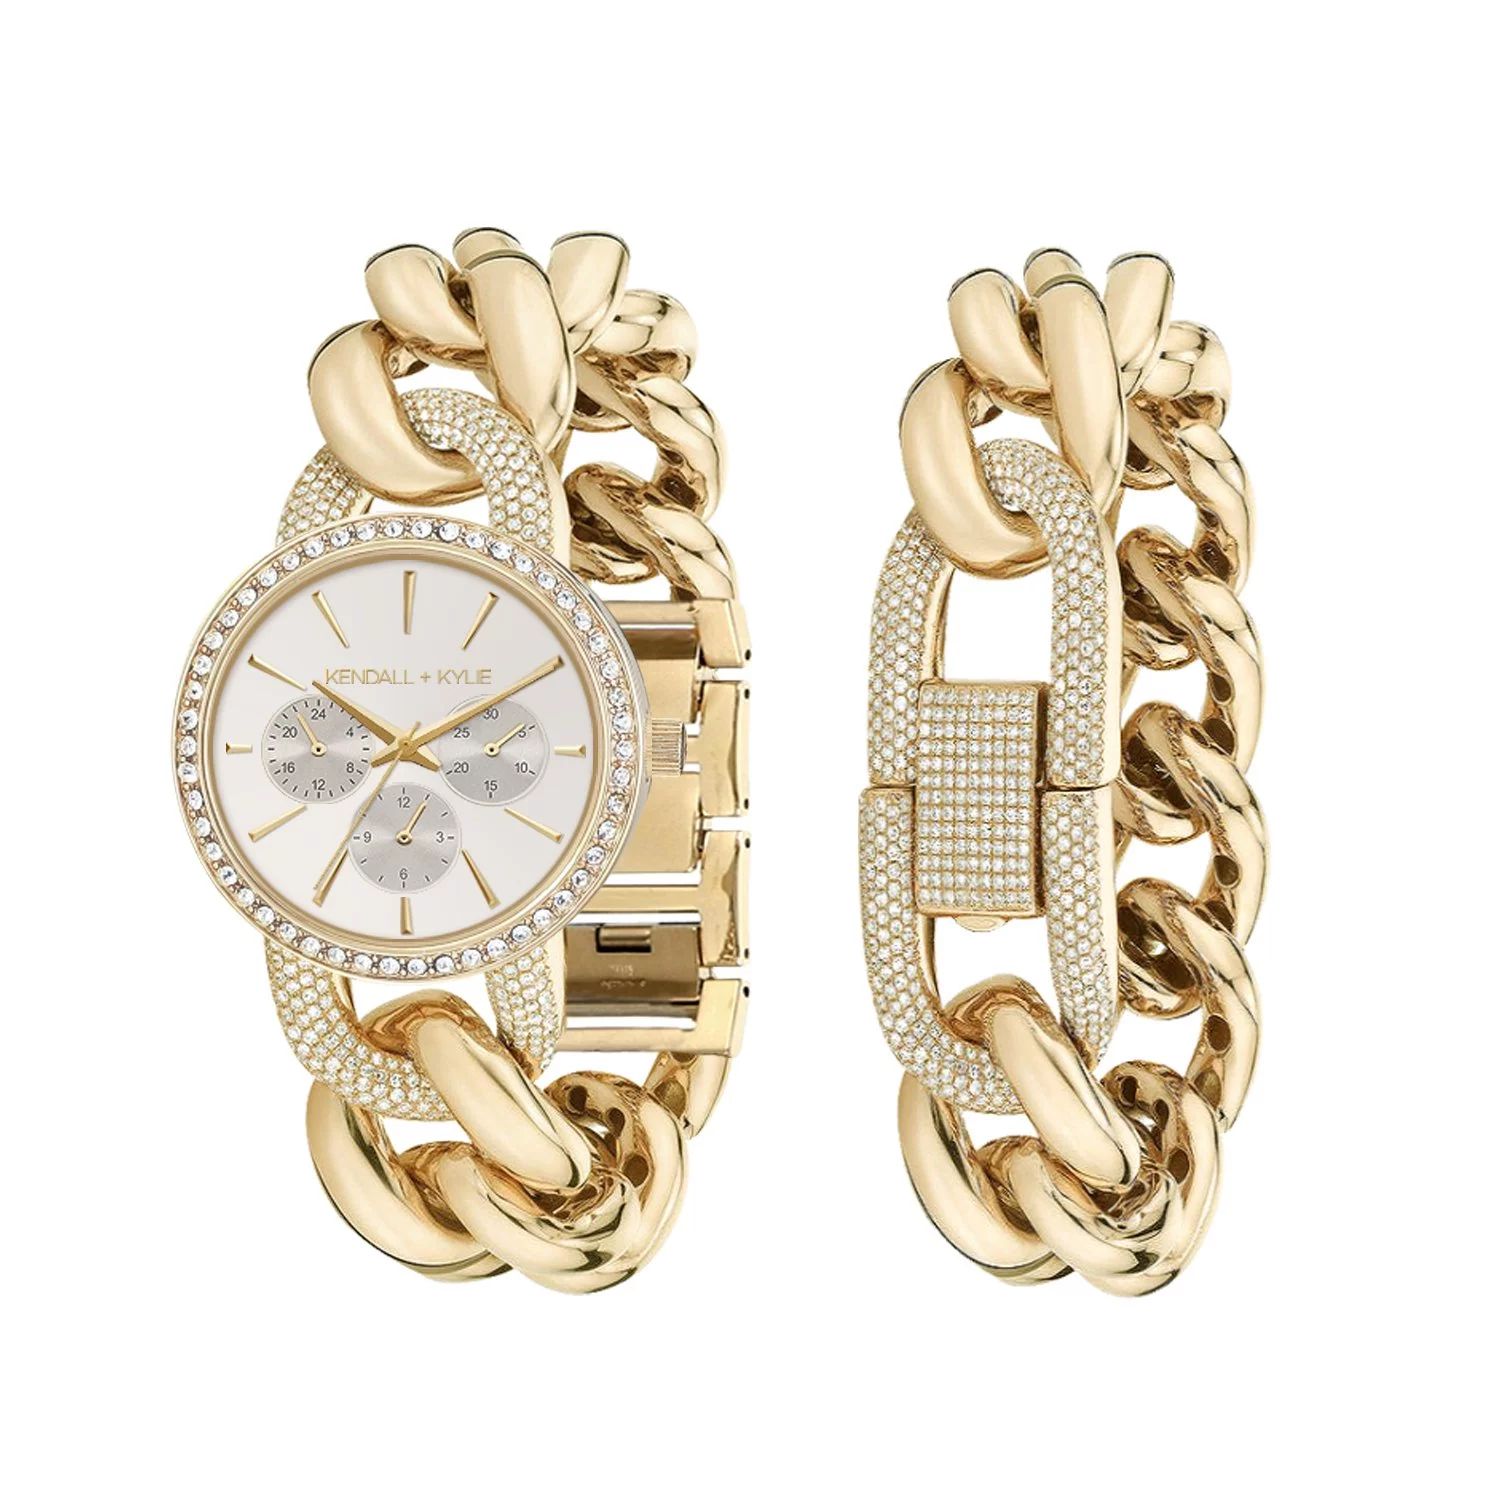 Kendall + Kylie Watch: Large Open-Link Gold Toned Metal Chronograph and Bracelet Set | Walmart (US)